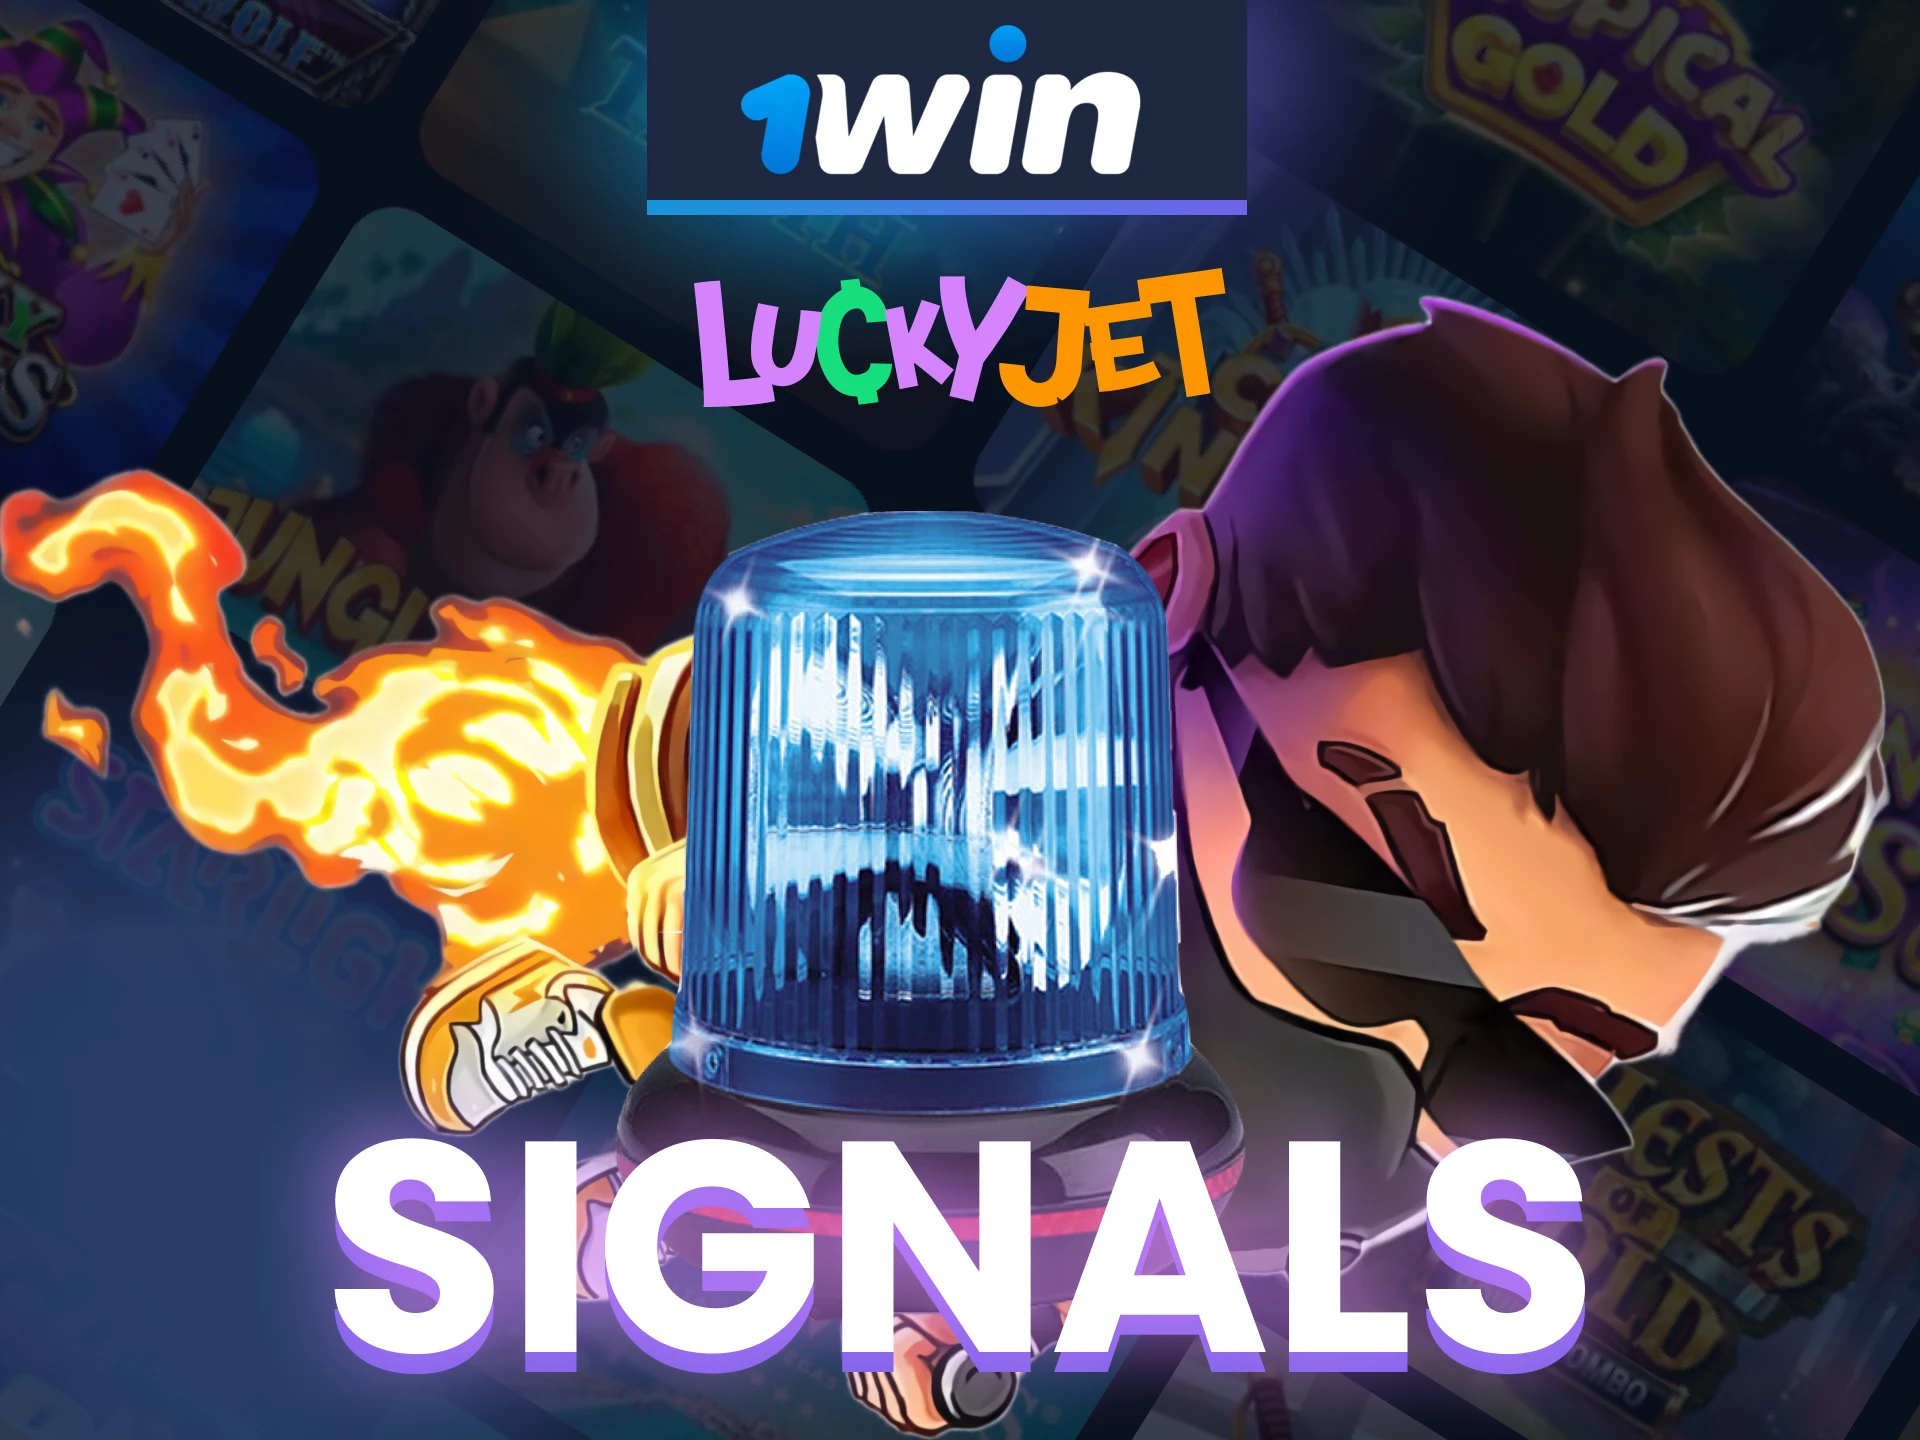 We will tell you about the possible Telegram signals for Lucky Jet on 1win.